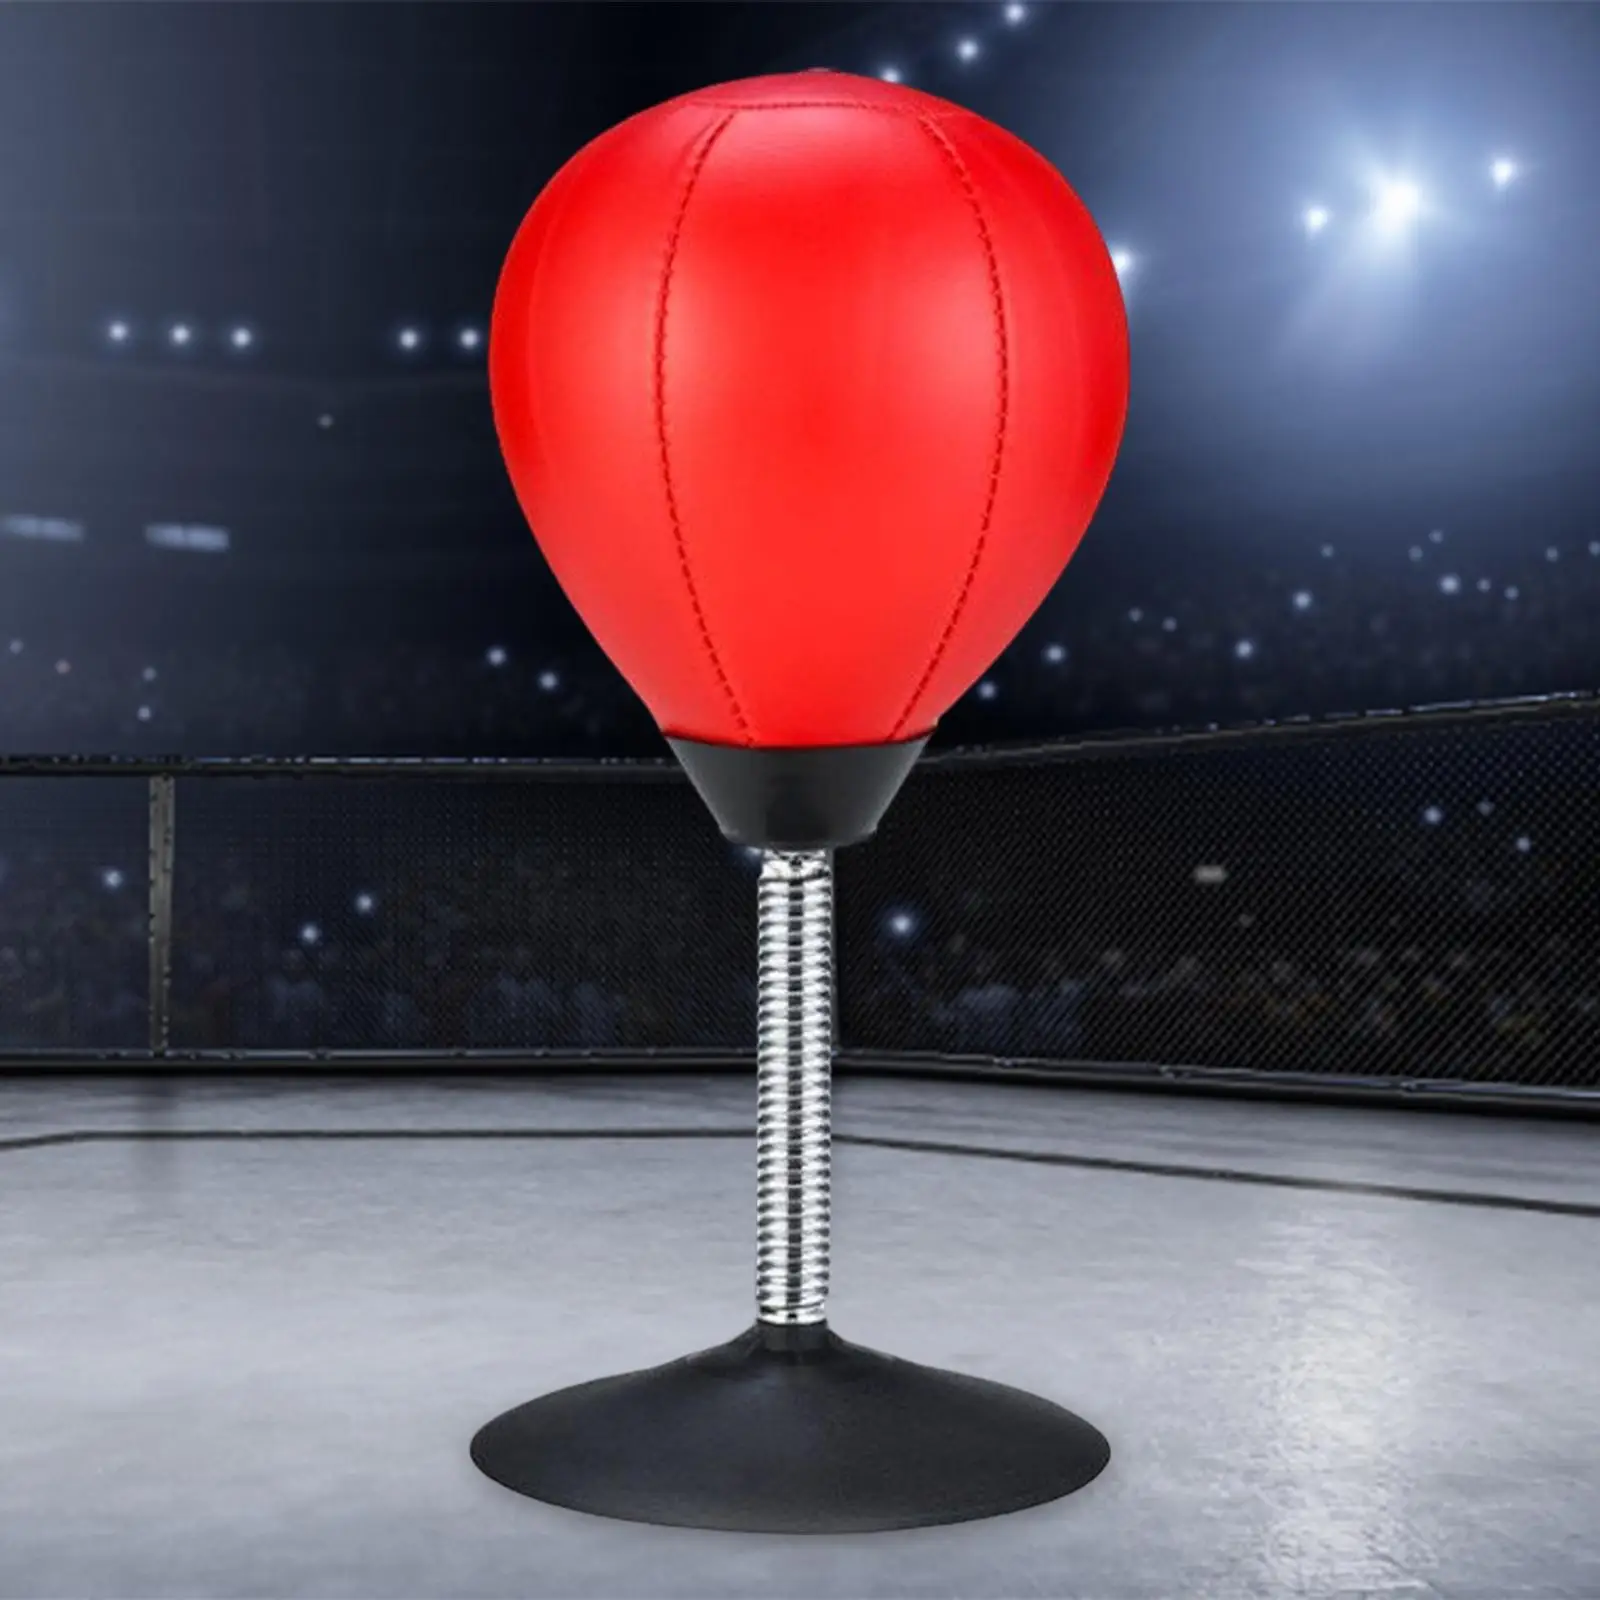 Training Hit Ball Stress Relief Boxing Speed Ball Desktop Punching Bag for Kids Workout